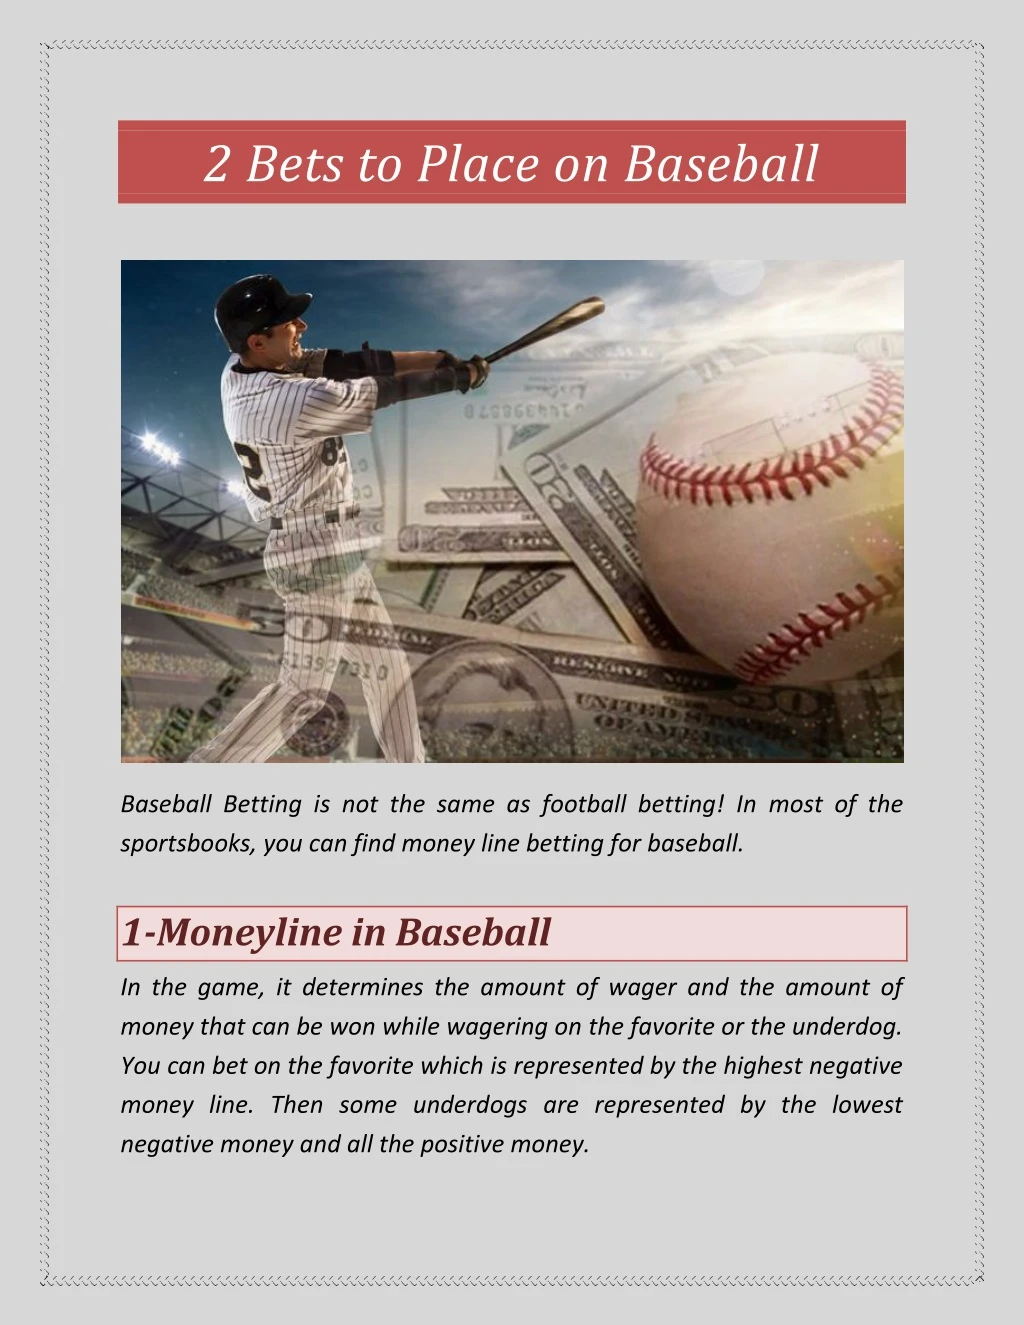 2 bets to place on baseball